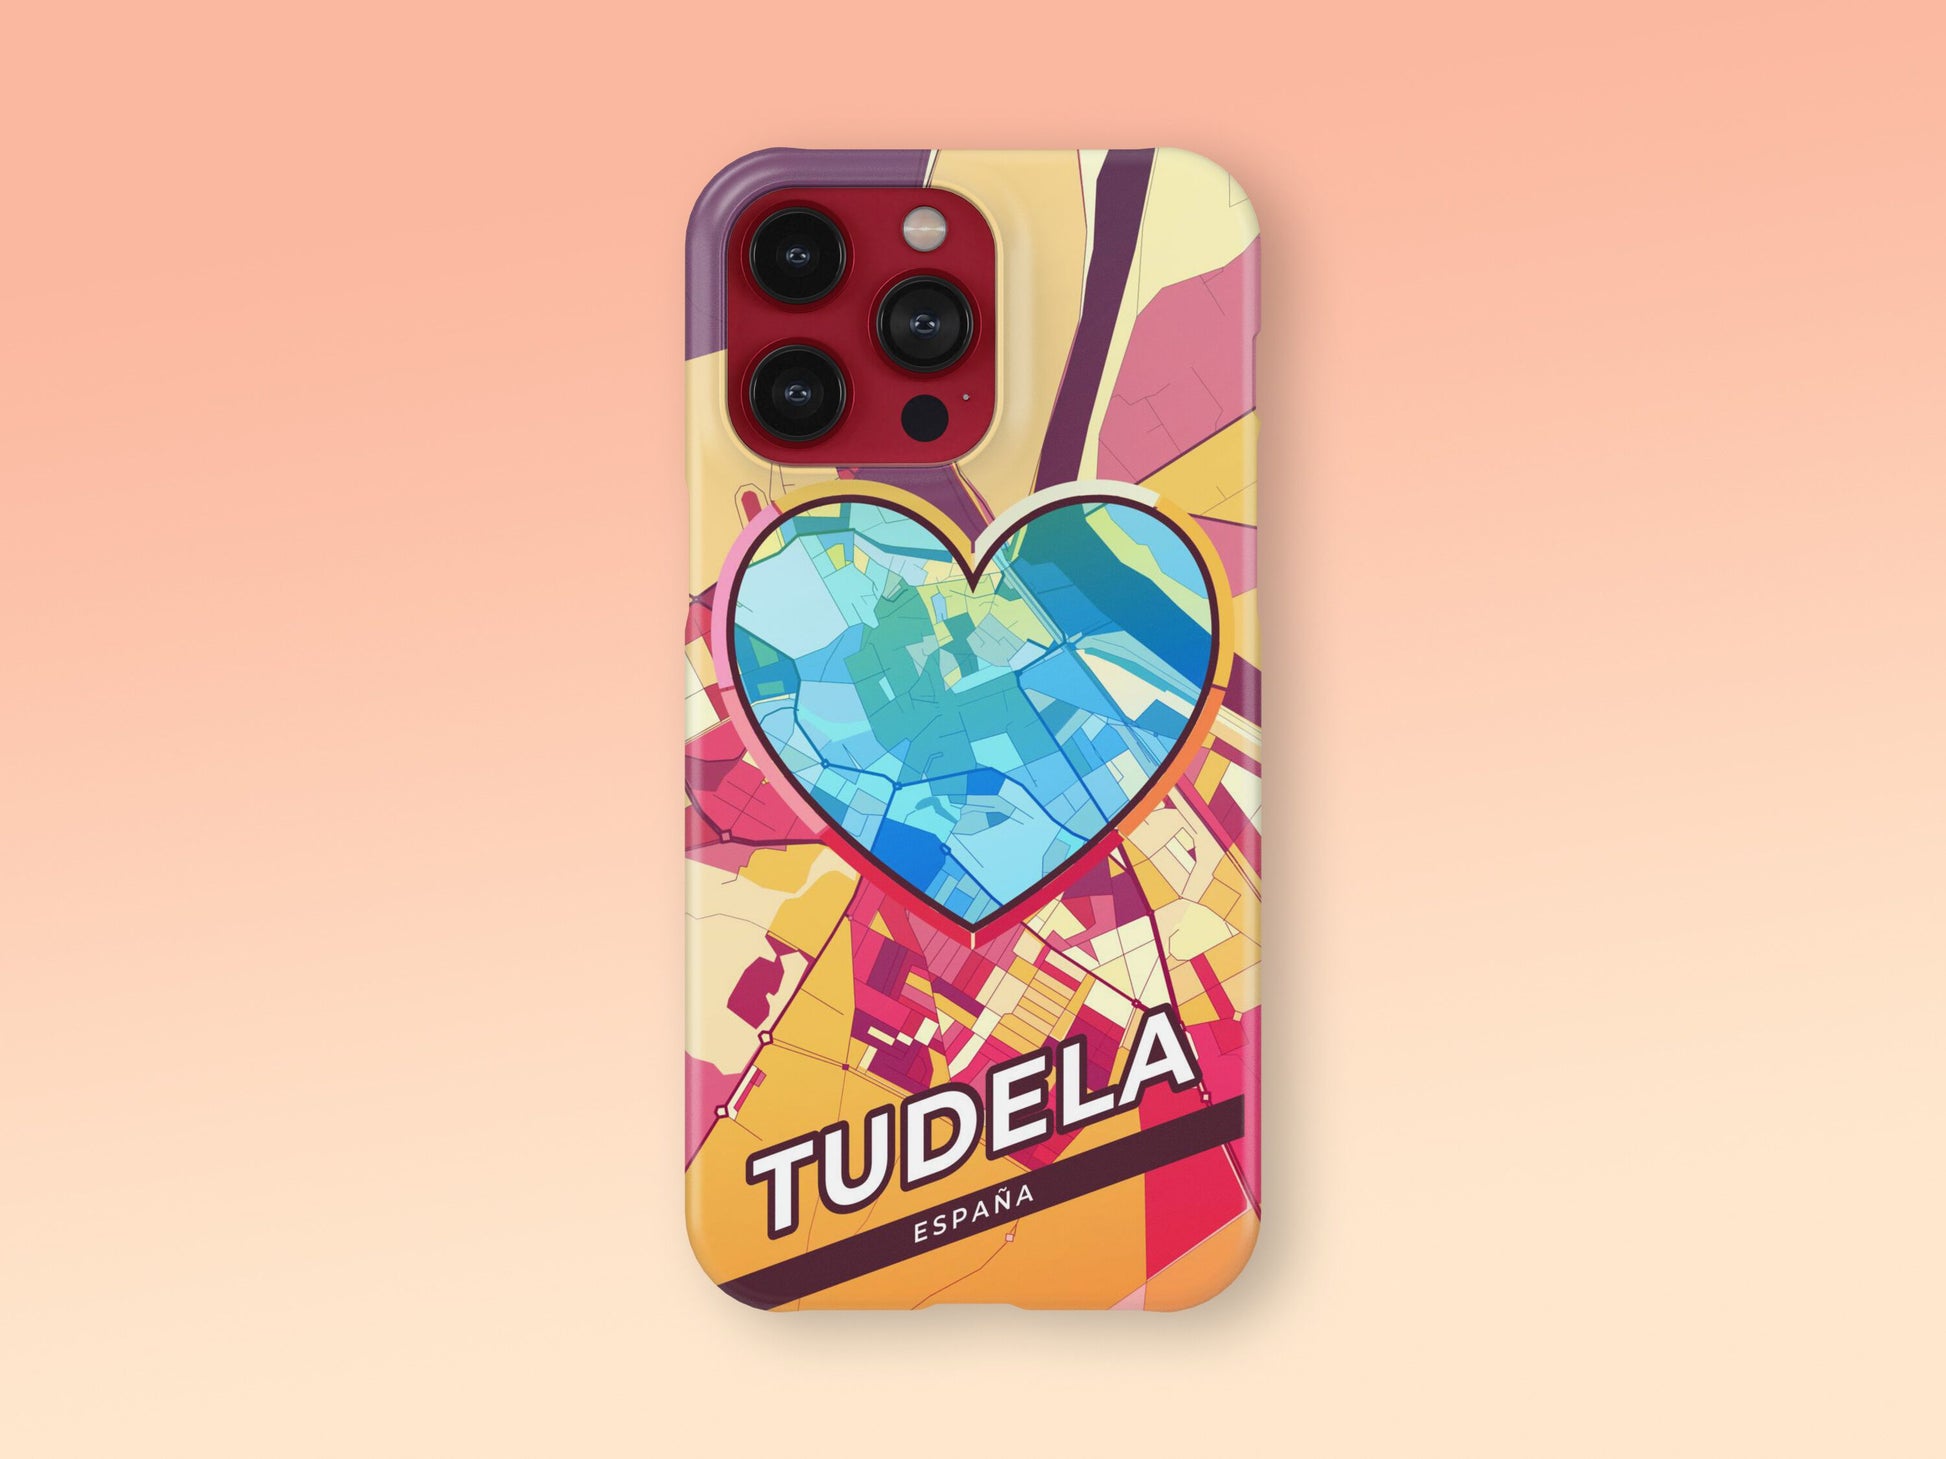 Tudela Spain slim phone case with colorful icon 2